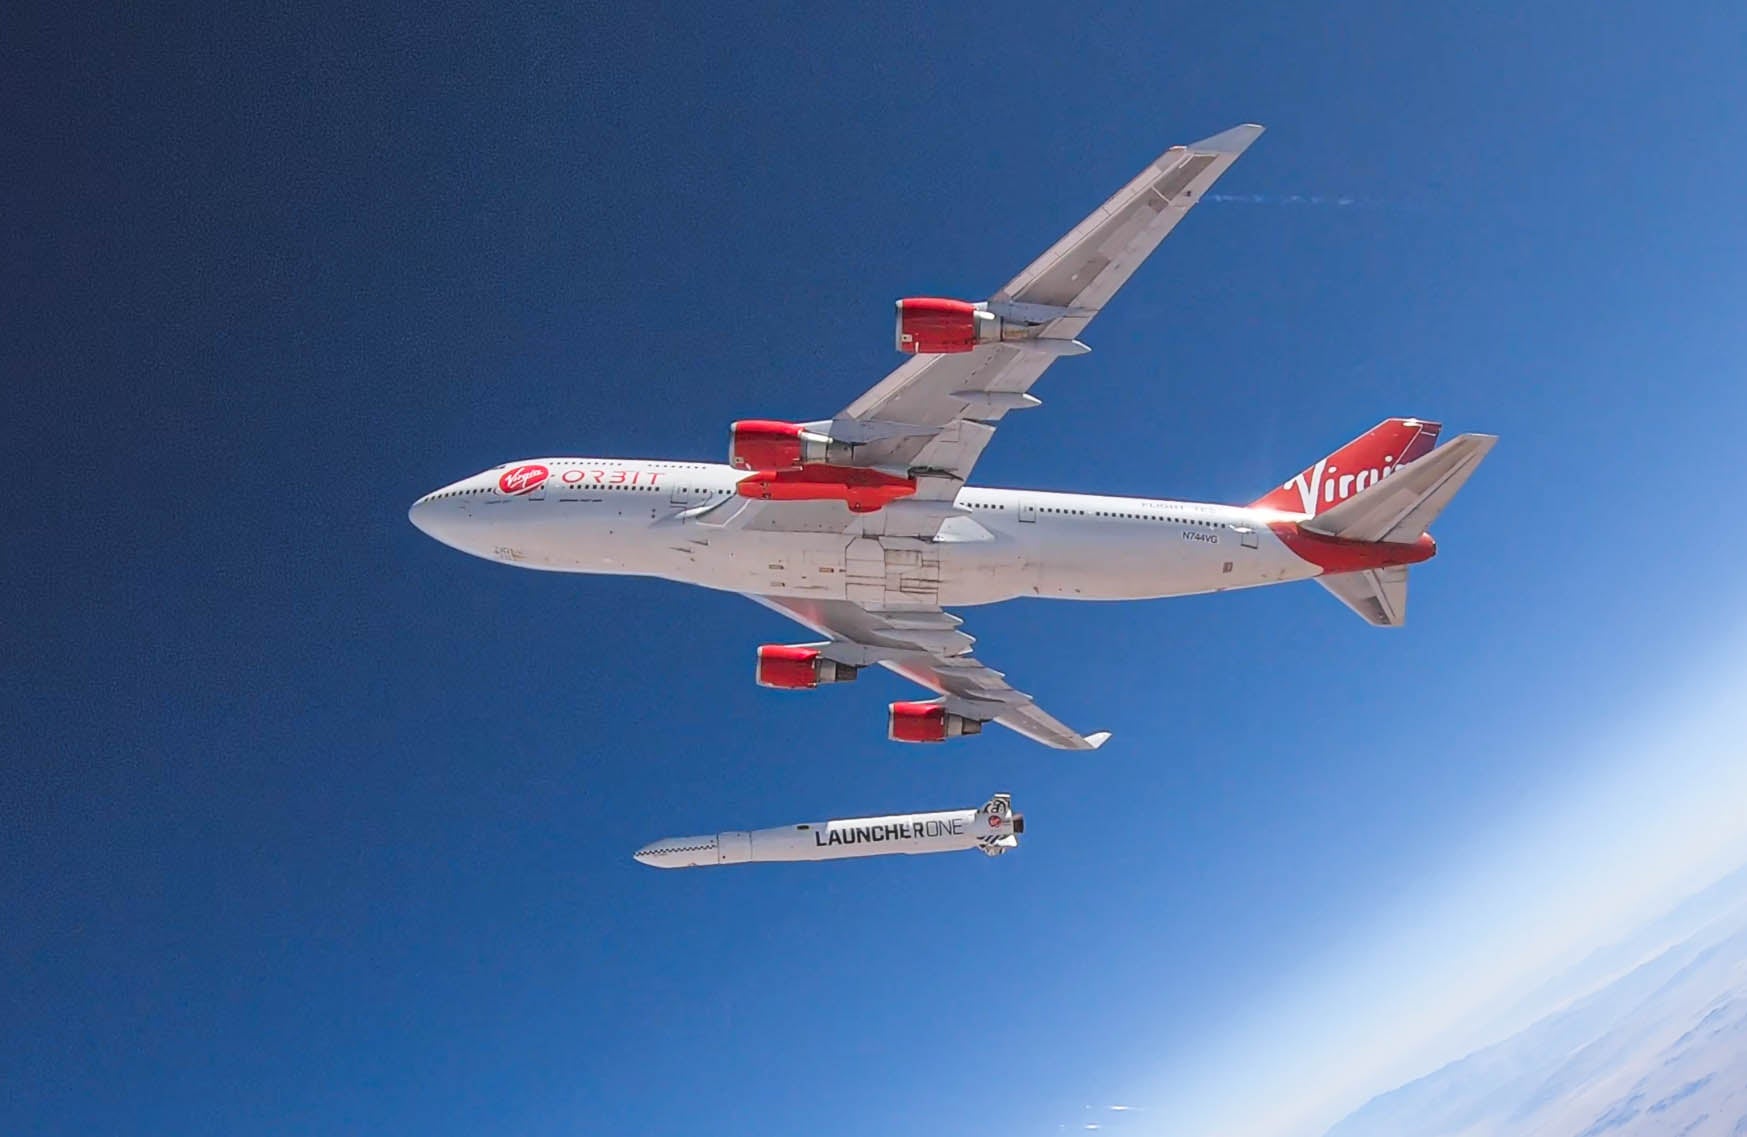 Undated handout photo issued by the Ministry of Defence of the Virgin Orbit LauncherOne. Sir Richard Branson’s Virgin Orbit is preparing to make history on Sunday with the first orbital test flight of its LauncherOne vehicle.